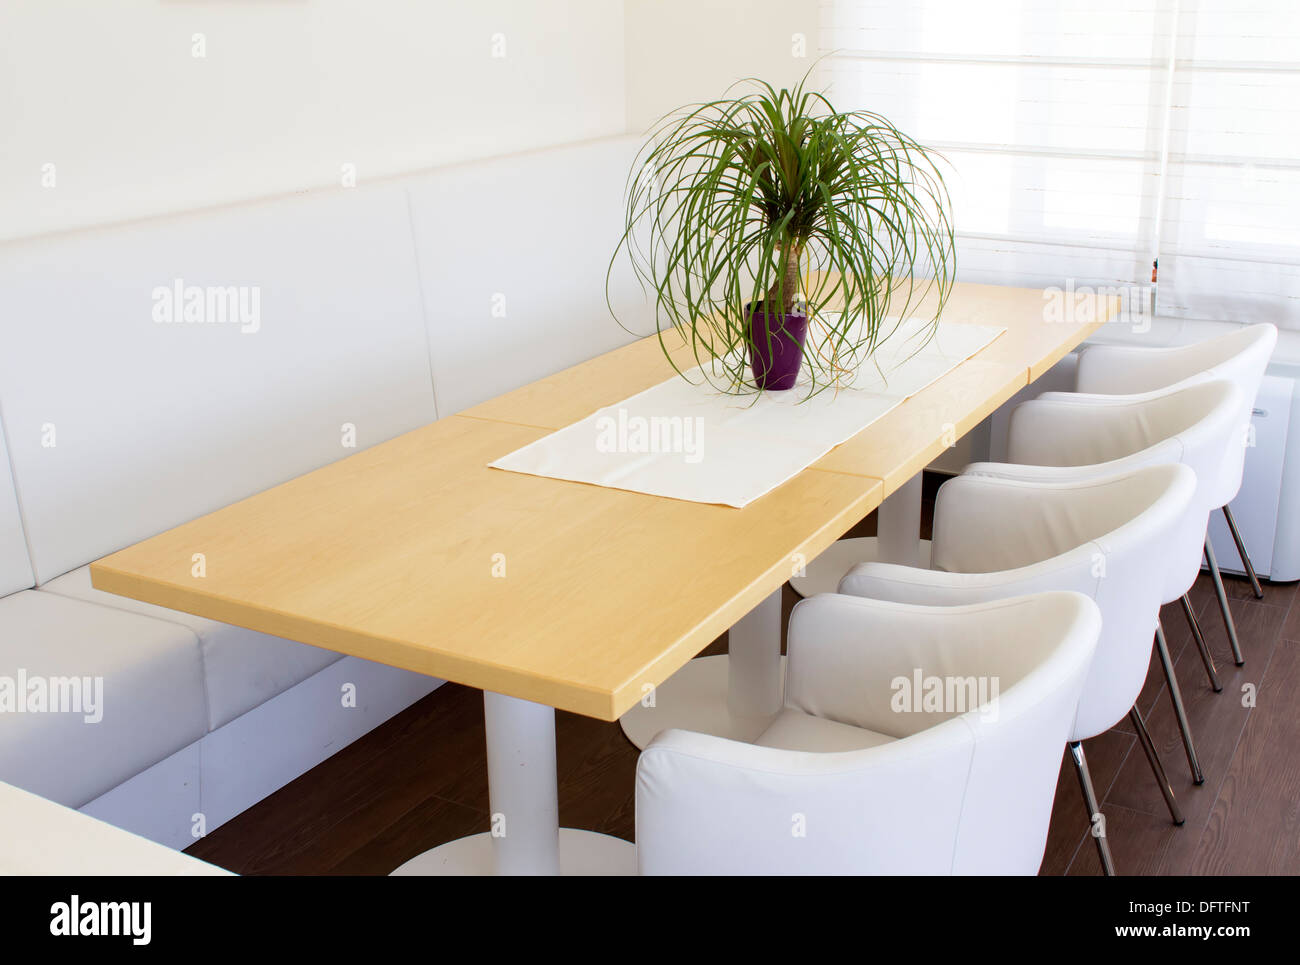 Setup of the business table with white chairs. Stock Photo